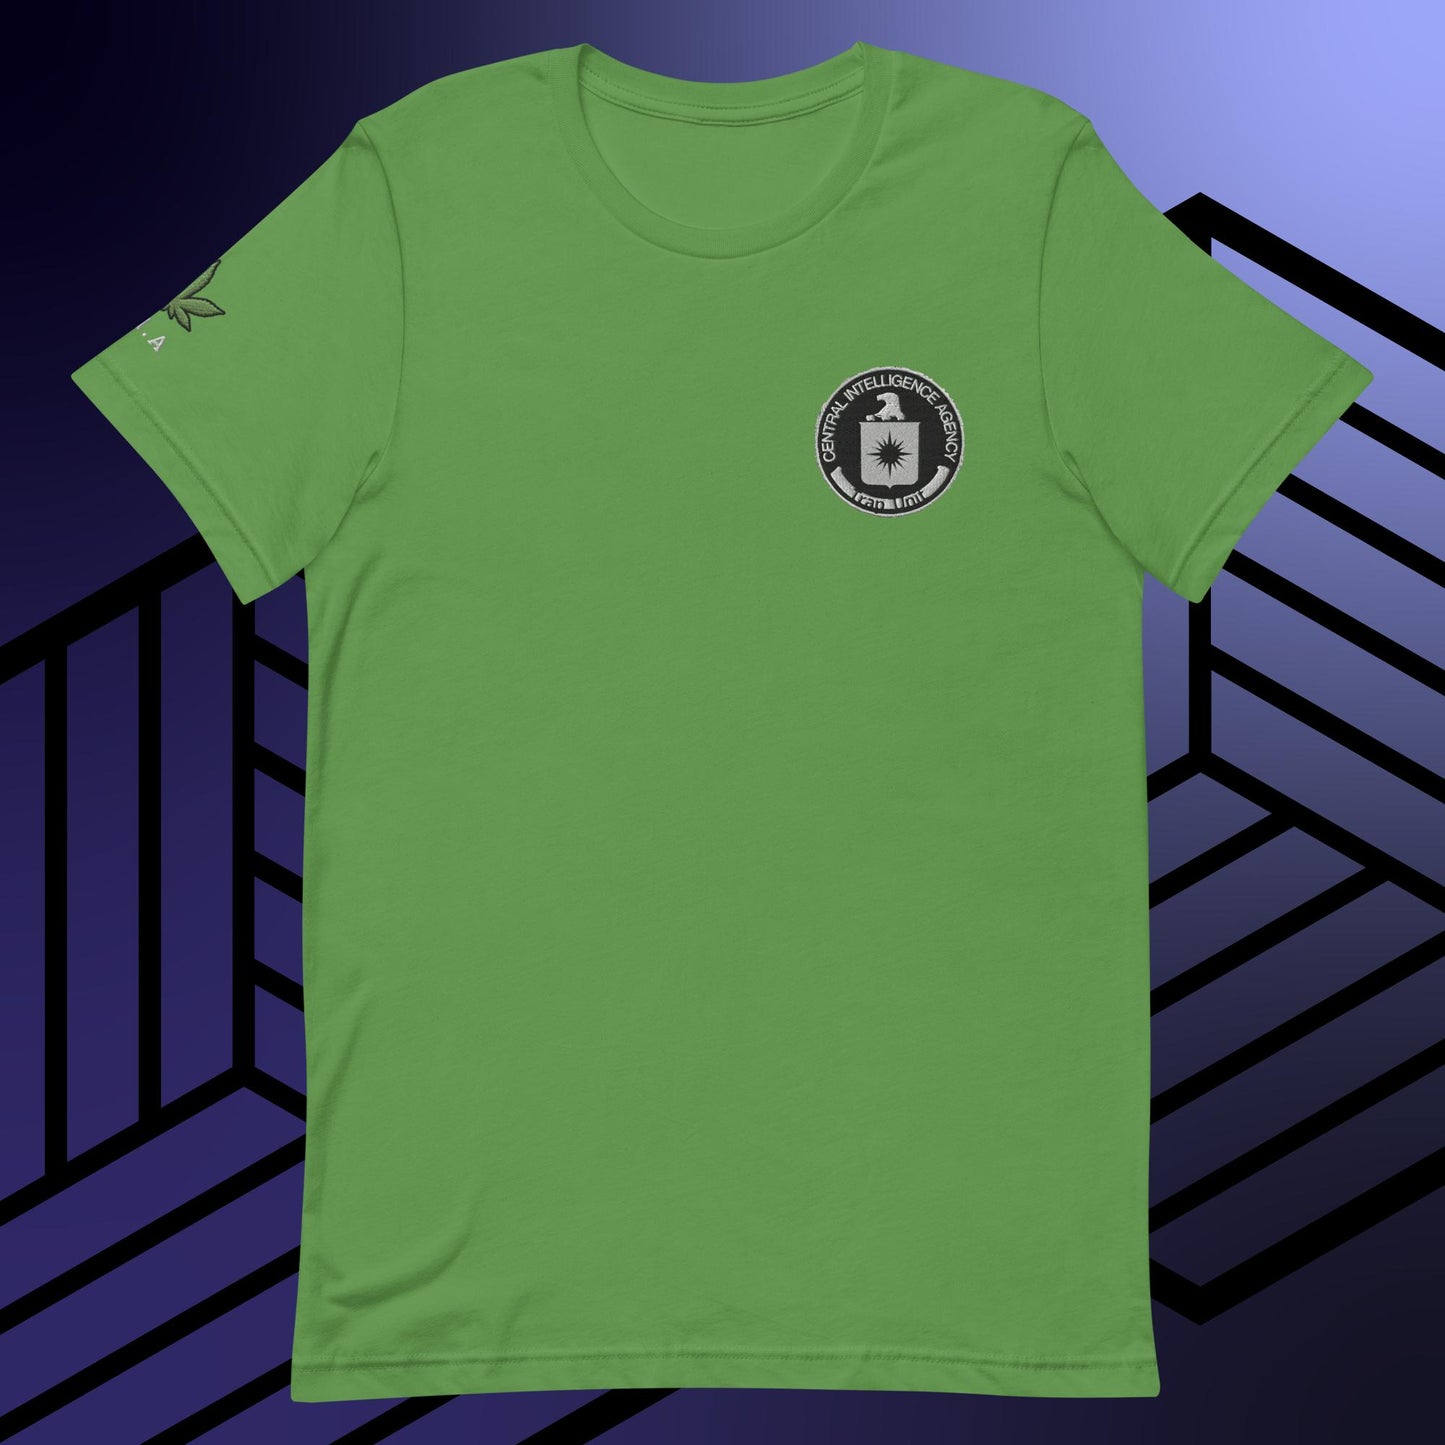 a green t - shirt with a black and white logo